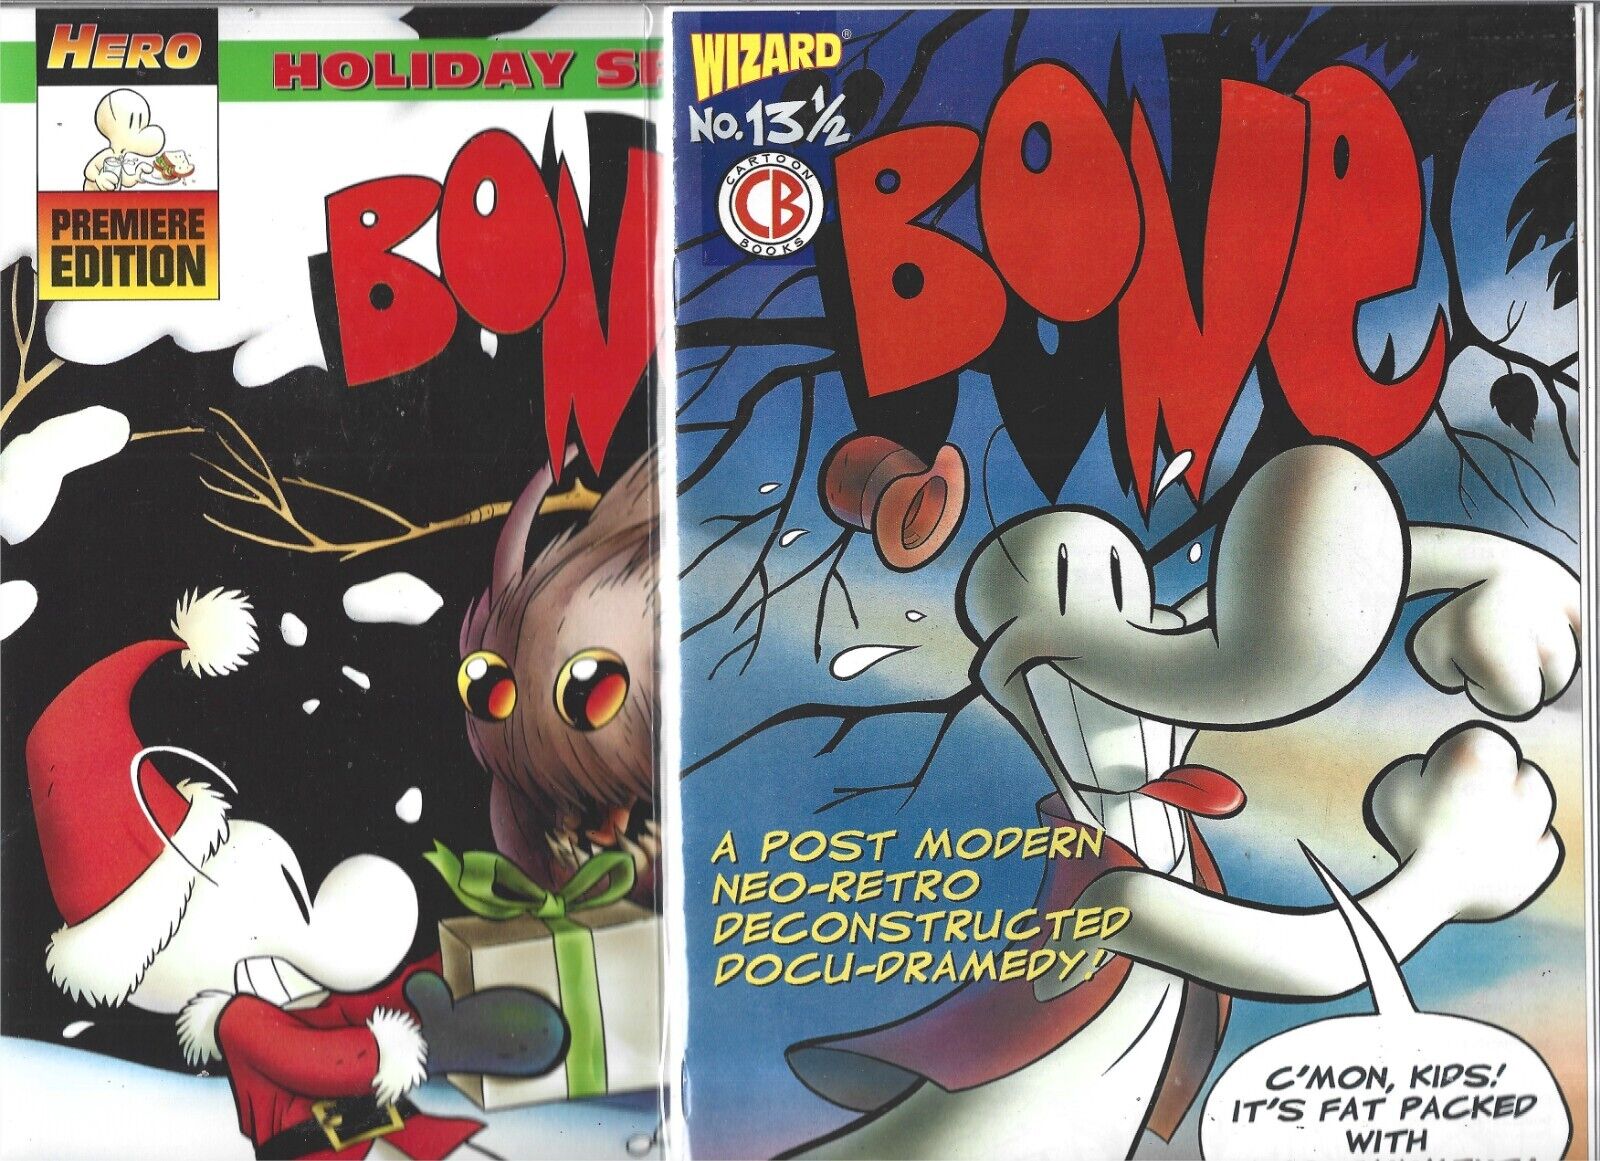 BONE LOT OF 2 WIZARD #13 1/2 WITH COA & HERO SPECIAL EDITION HOLIDAY SPECIAL (VF